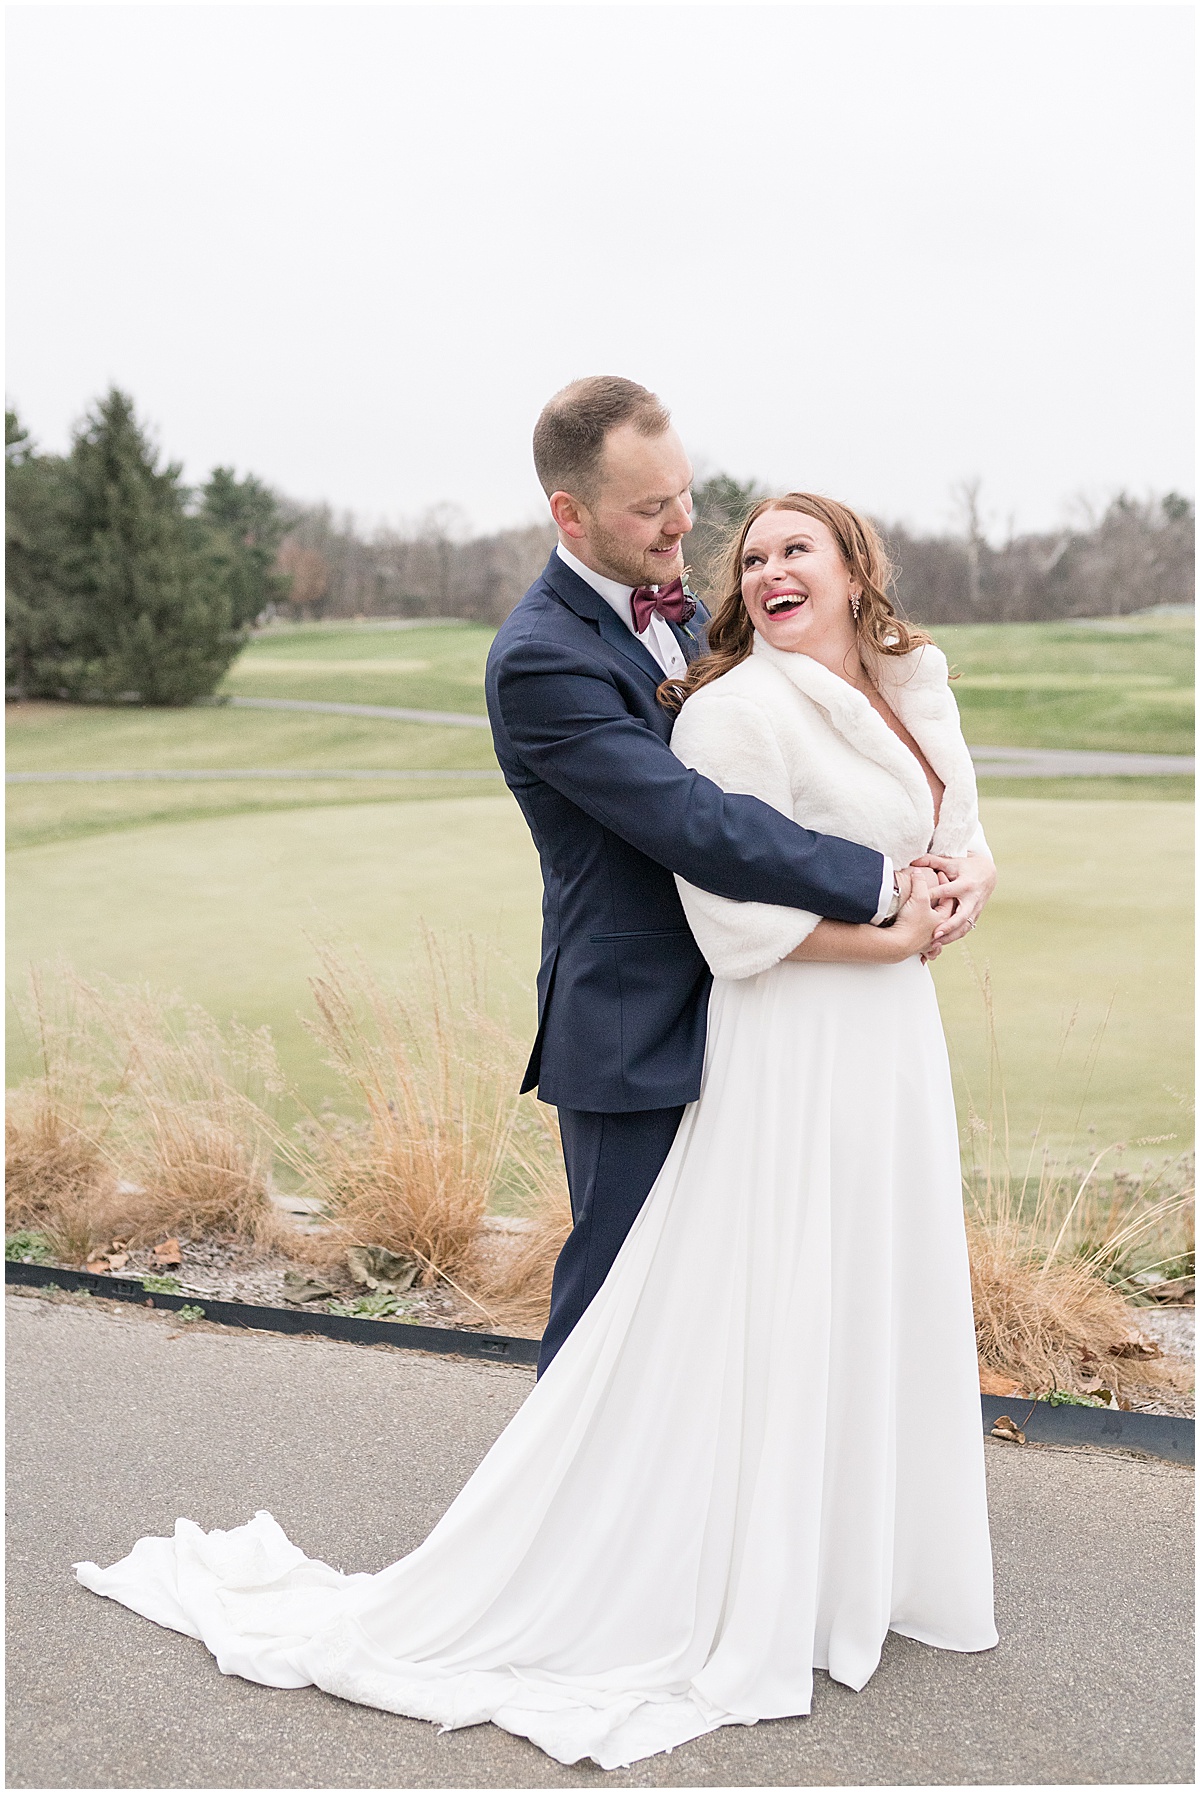 Bride and groom hug after Iron & Ember events wedding in Carmel, Indiana